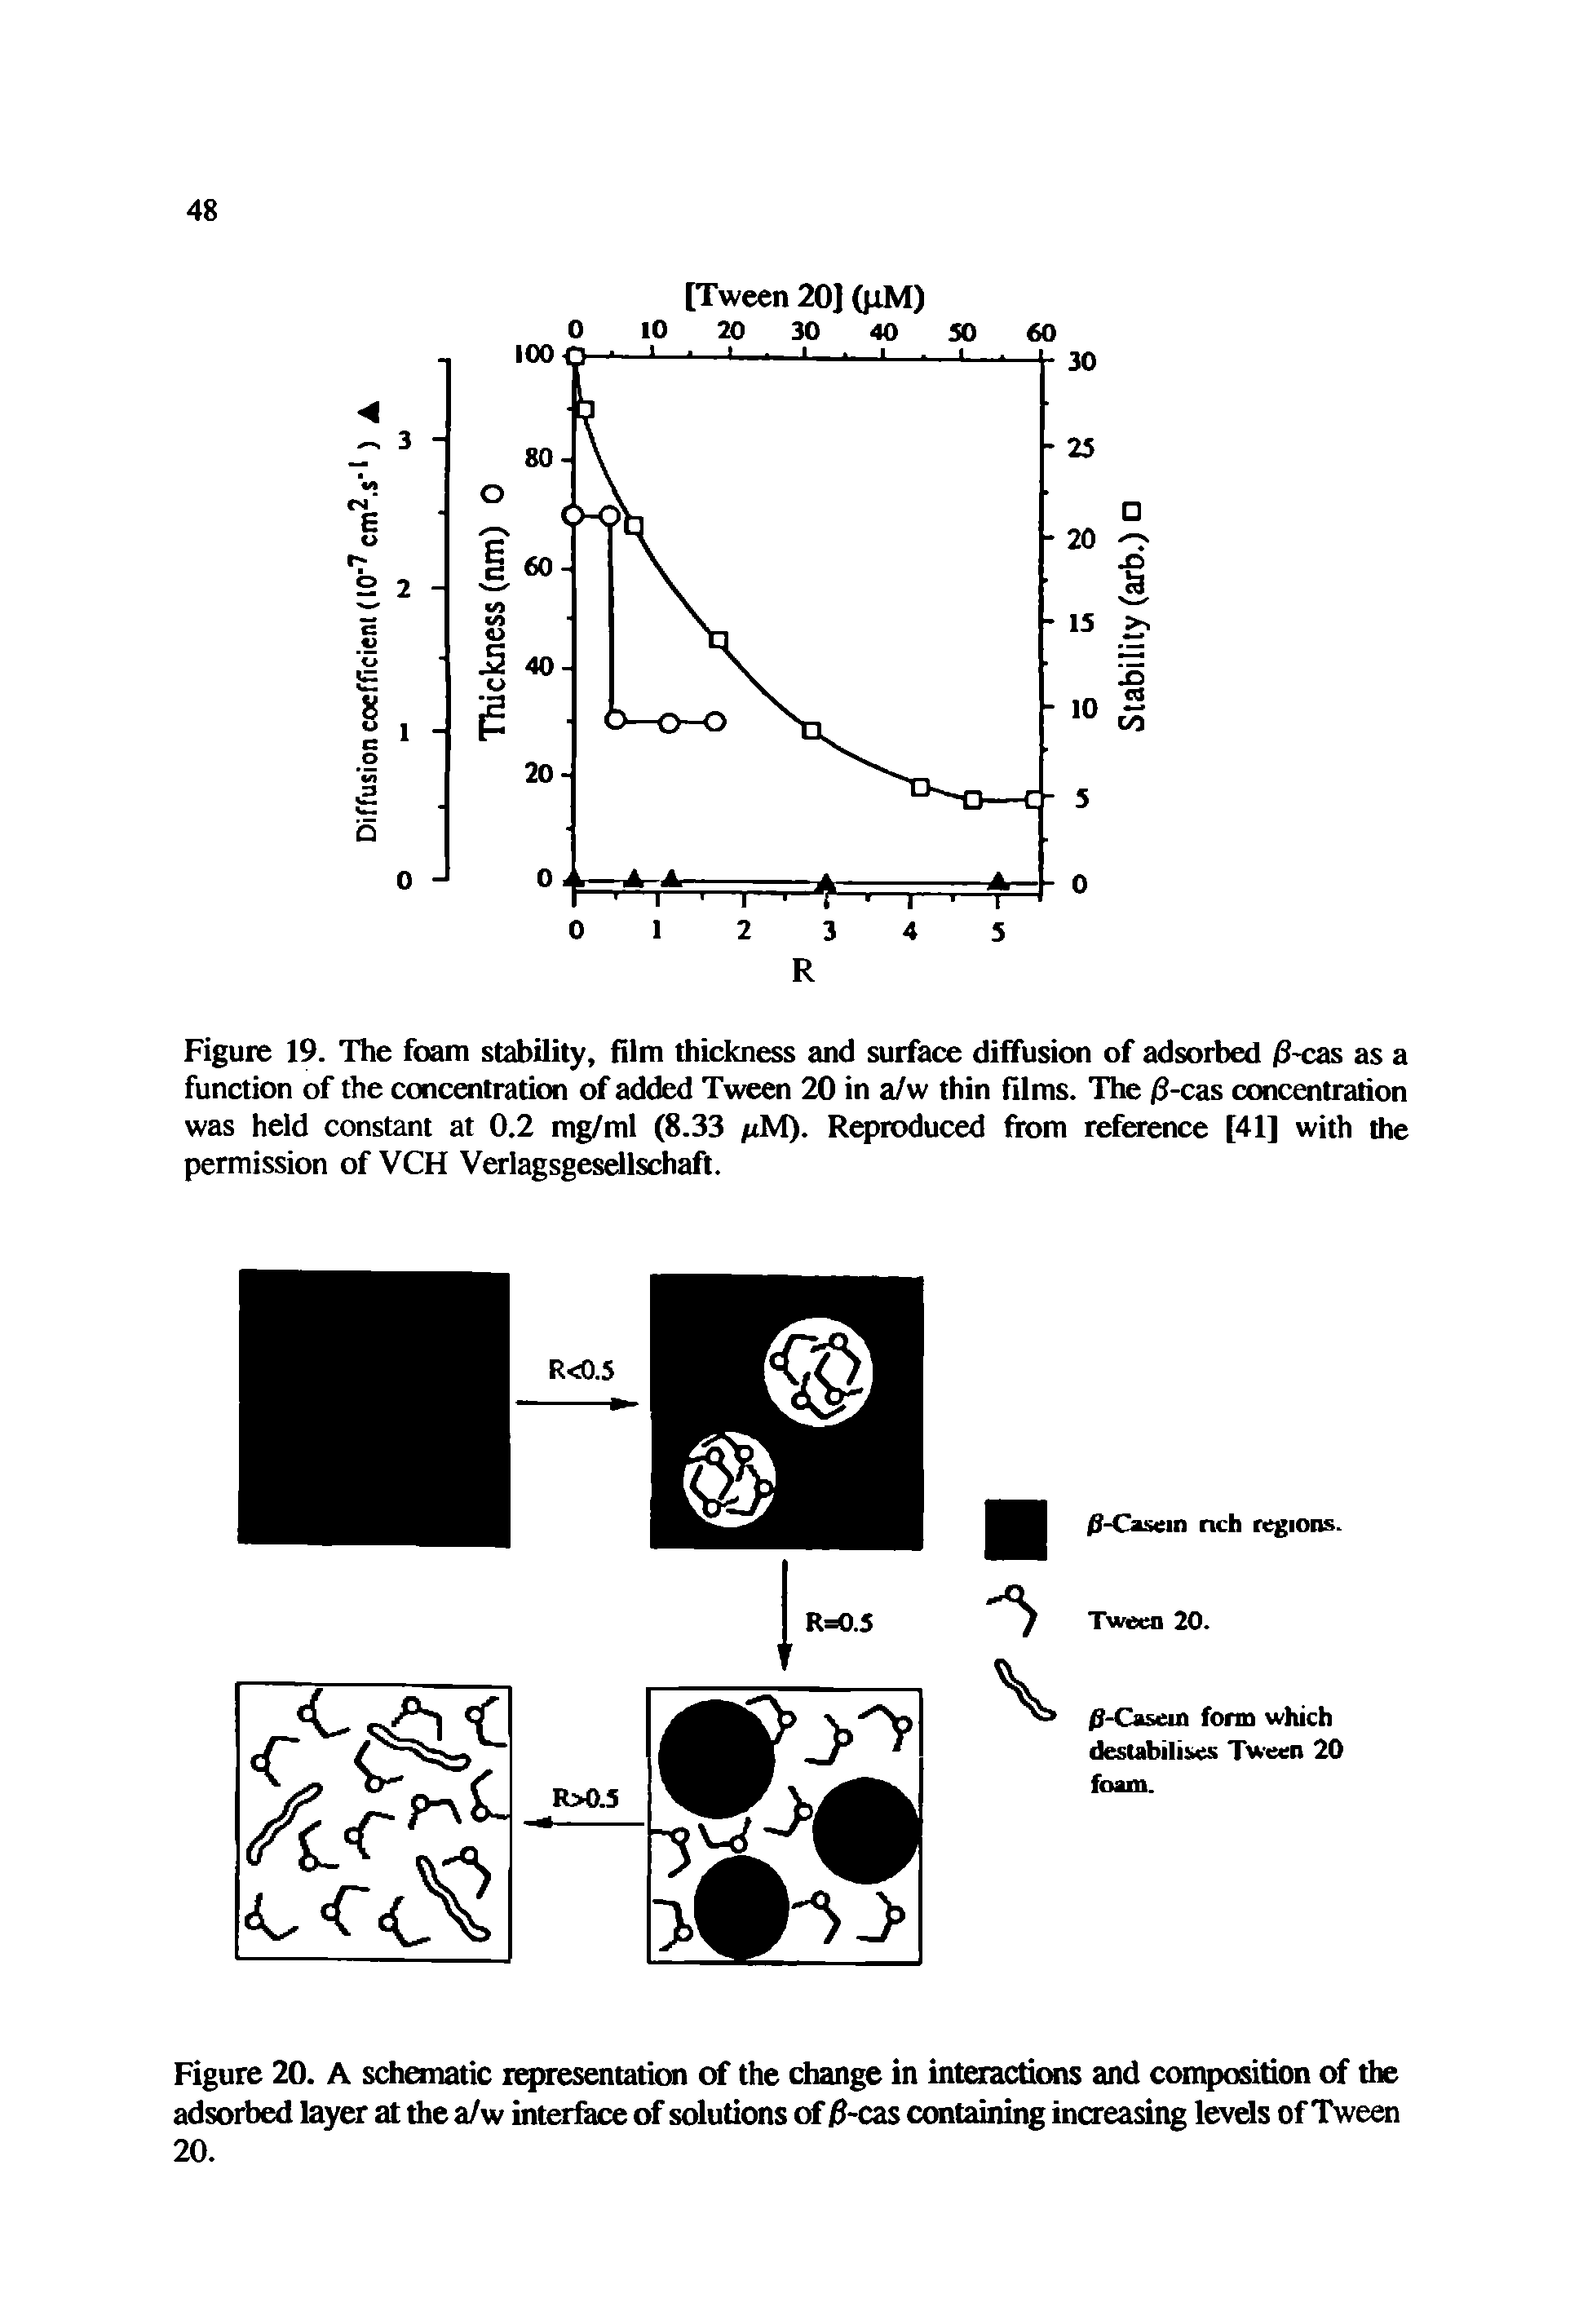 Figure 19. The foam stability, film thickness and surface diffusion of adsorbed /3-cas as a function of the concentration of added Tween 20 in a/w thin films. The /3-cas concentration was held constant at 0.2 mg/ml (8.33 nM). Reproduced from reference [41] with the permission of VCH Verlagsgesellschaft.